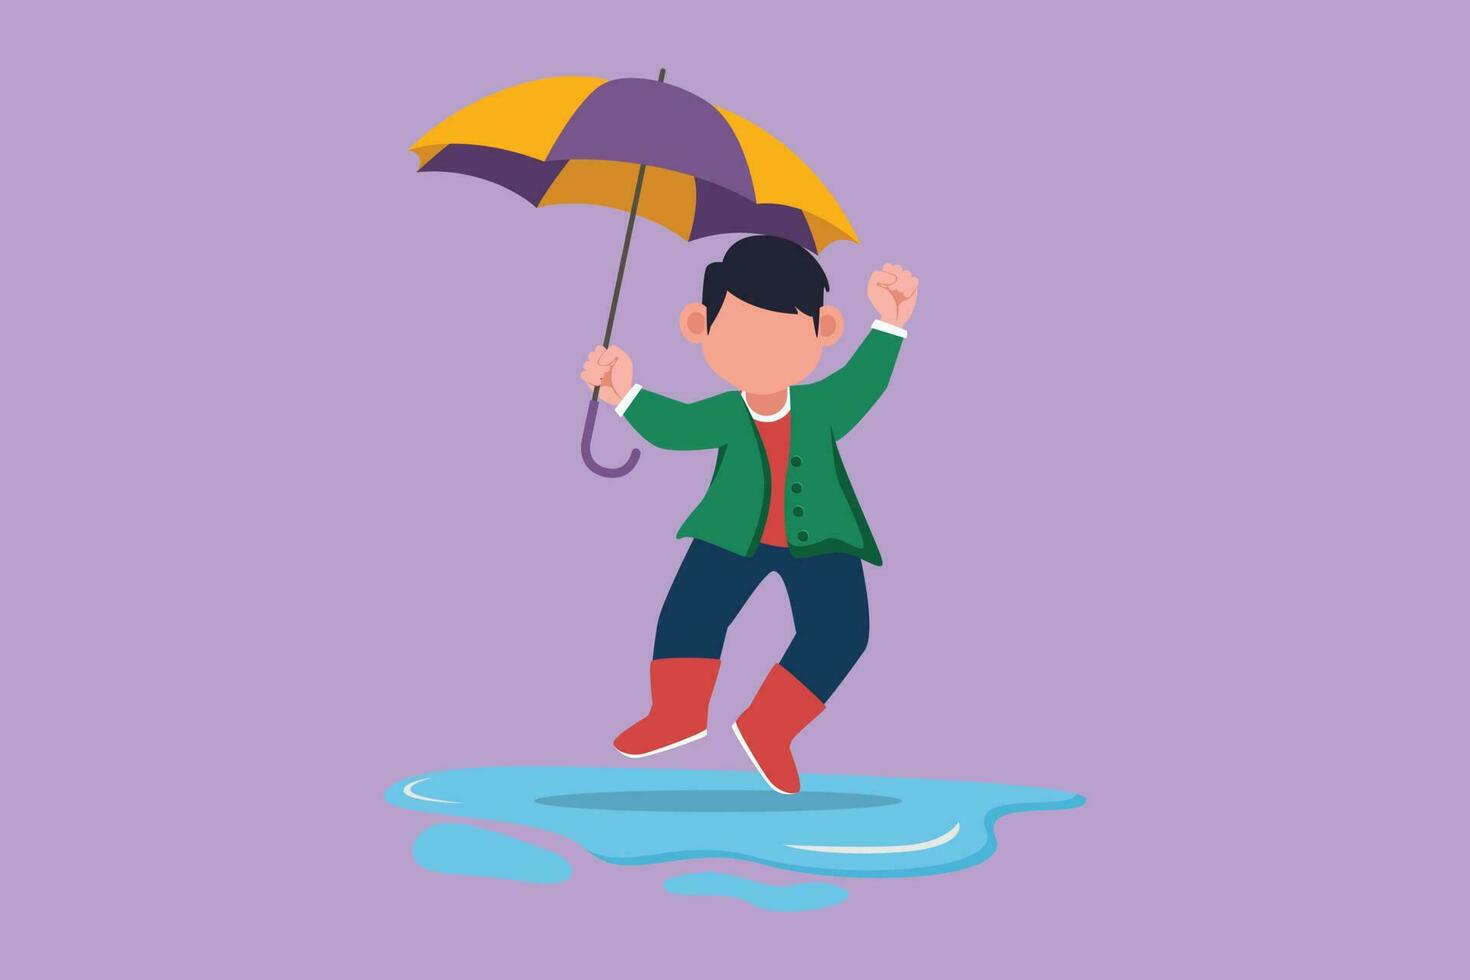 Cartoon flat style drawing cute little boy play wear raincoat and umbrella. Child playing in rain. Kids in raincoat and rubber boots plays in rain, puddle splashing. Graphic design vector illustration